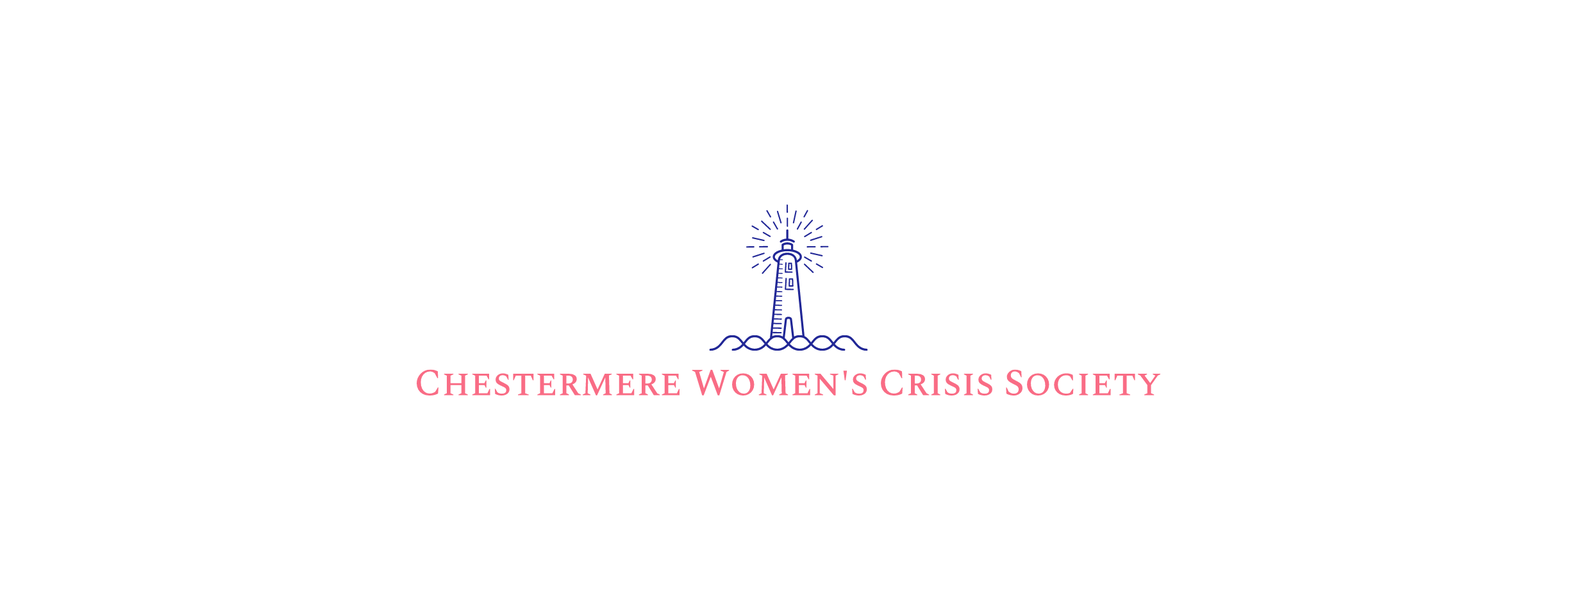 Chestermere Women's Crisis Society